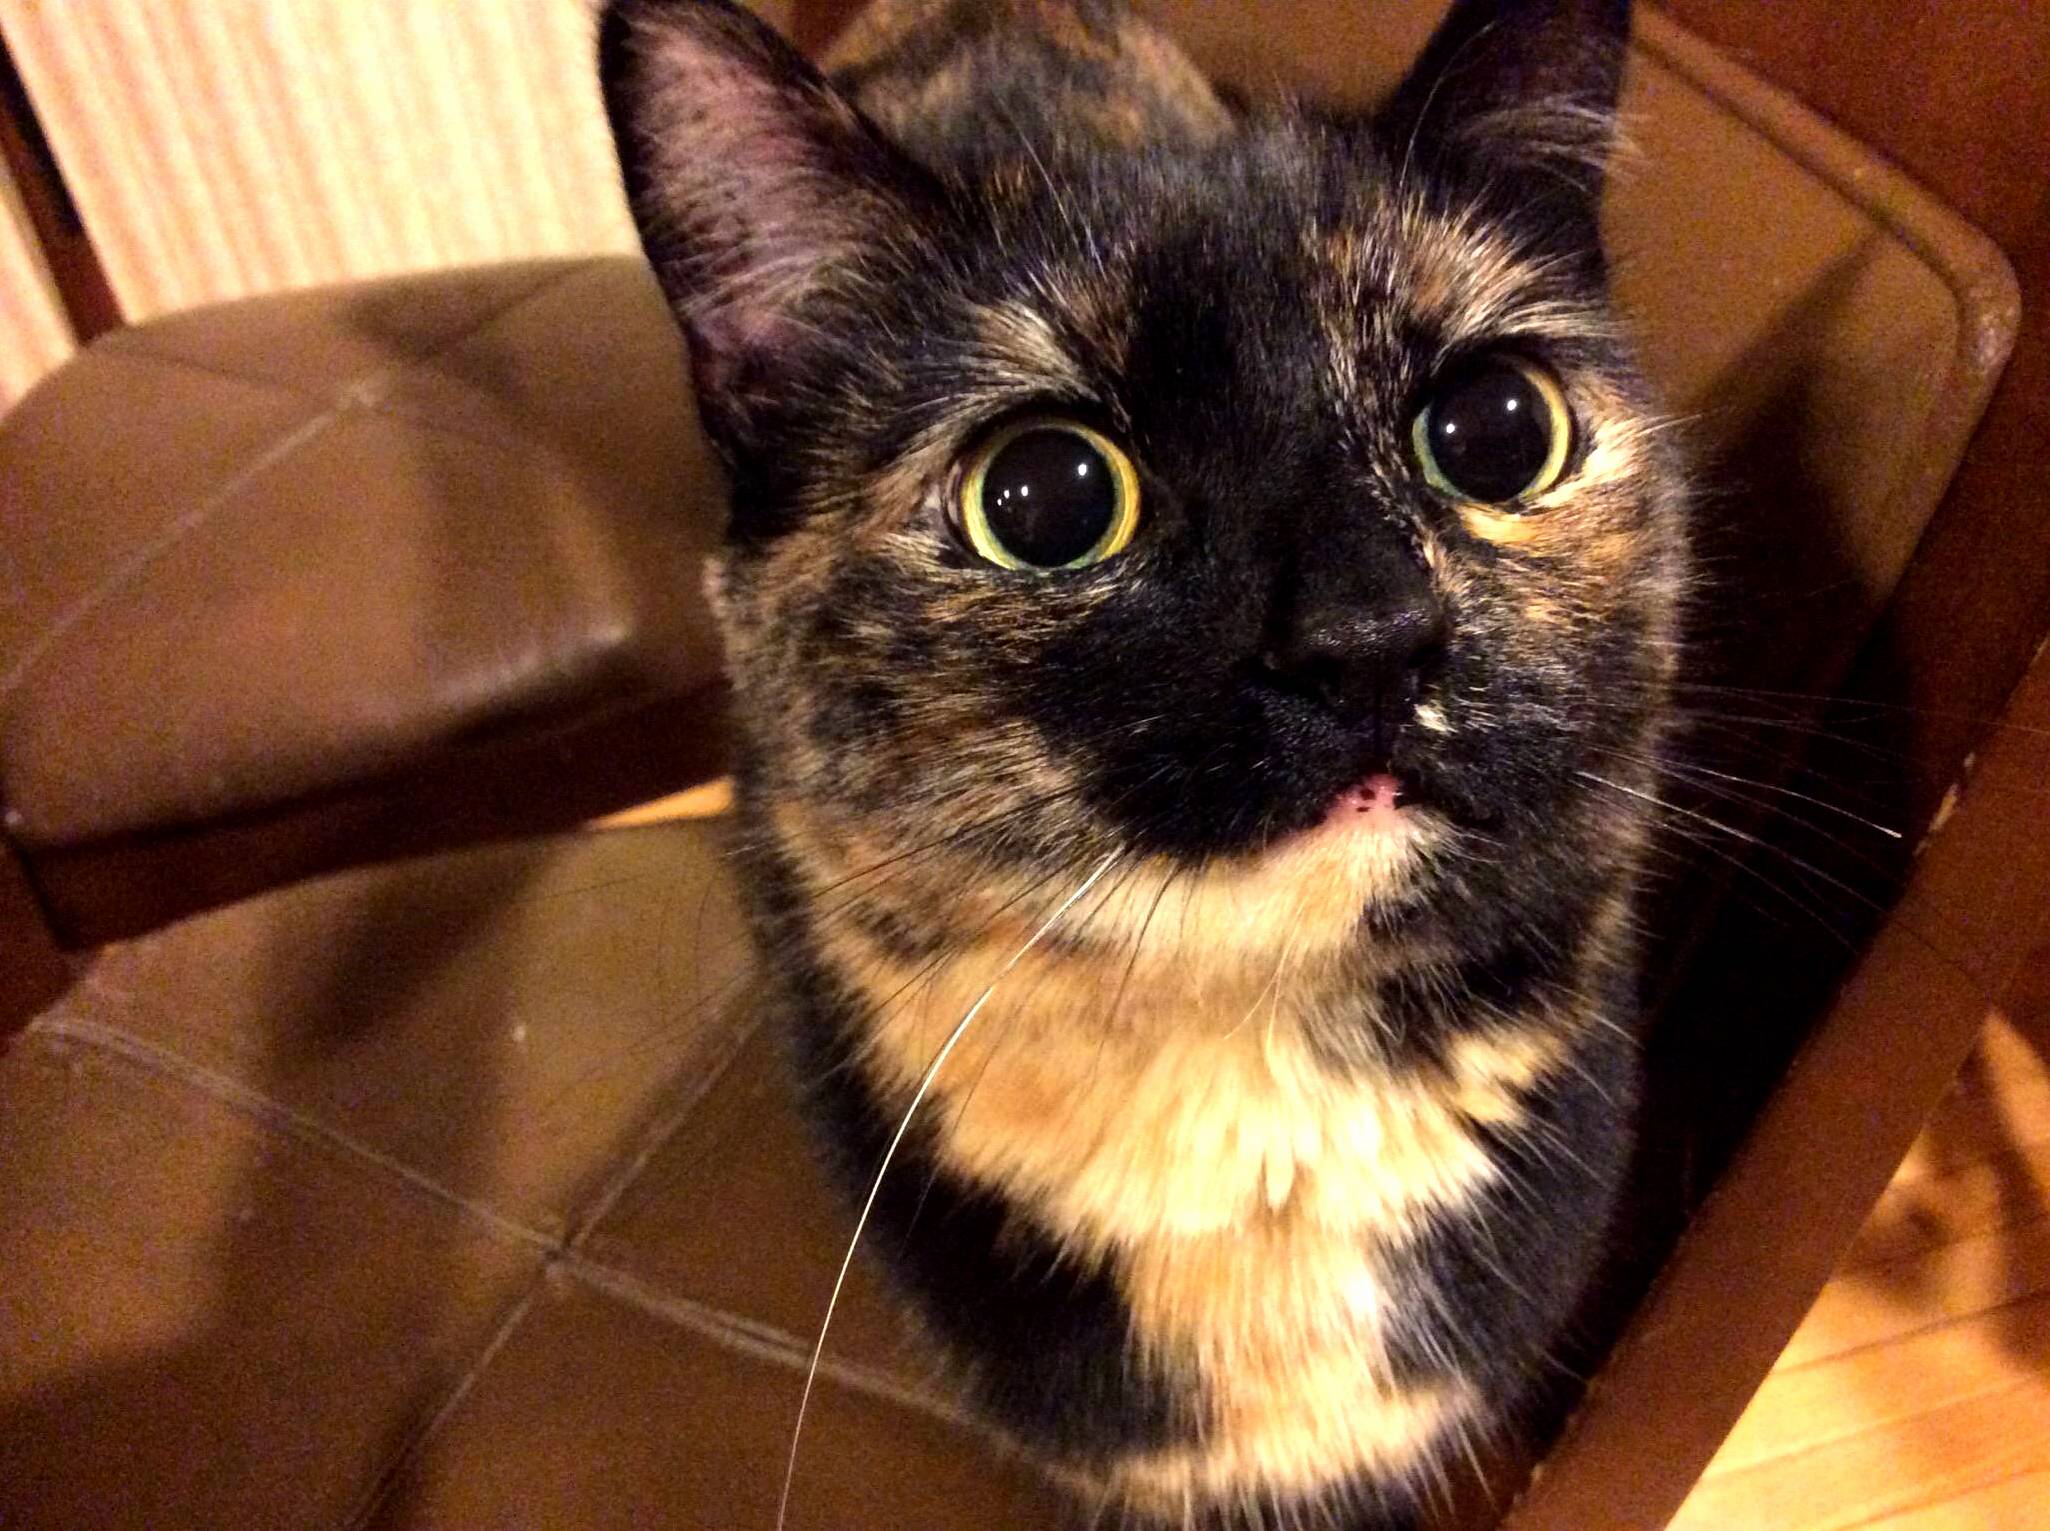 Indy looks cute until you try to pet her…